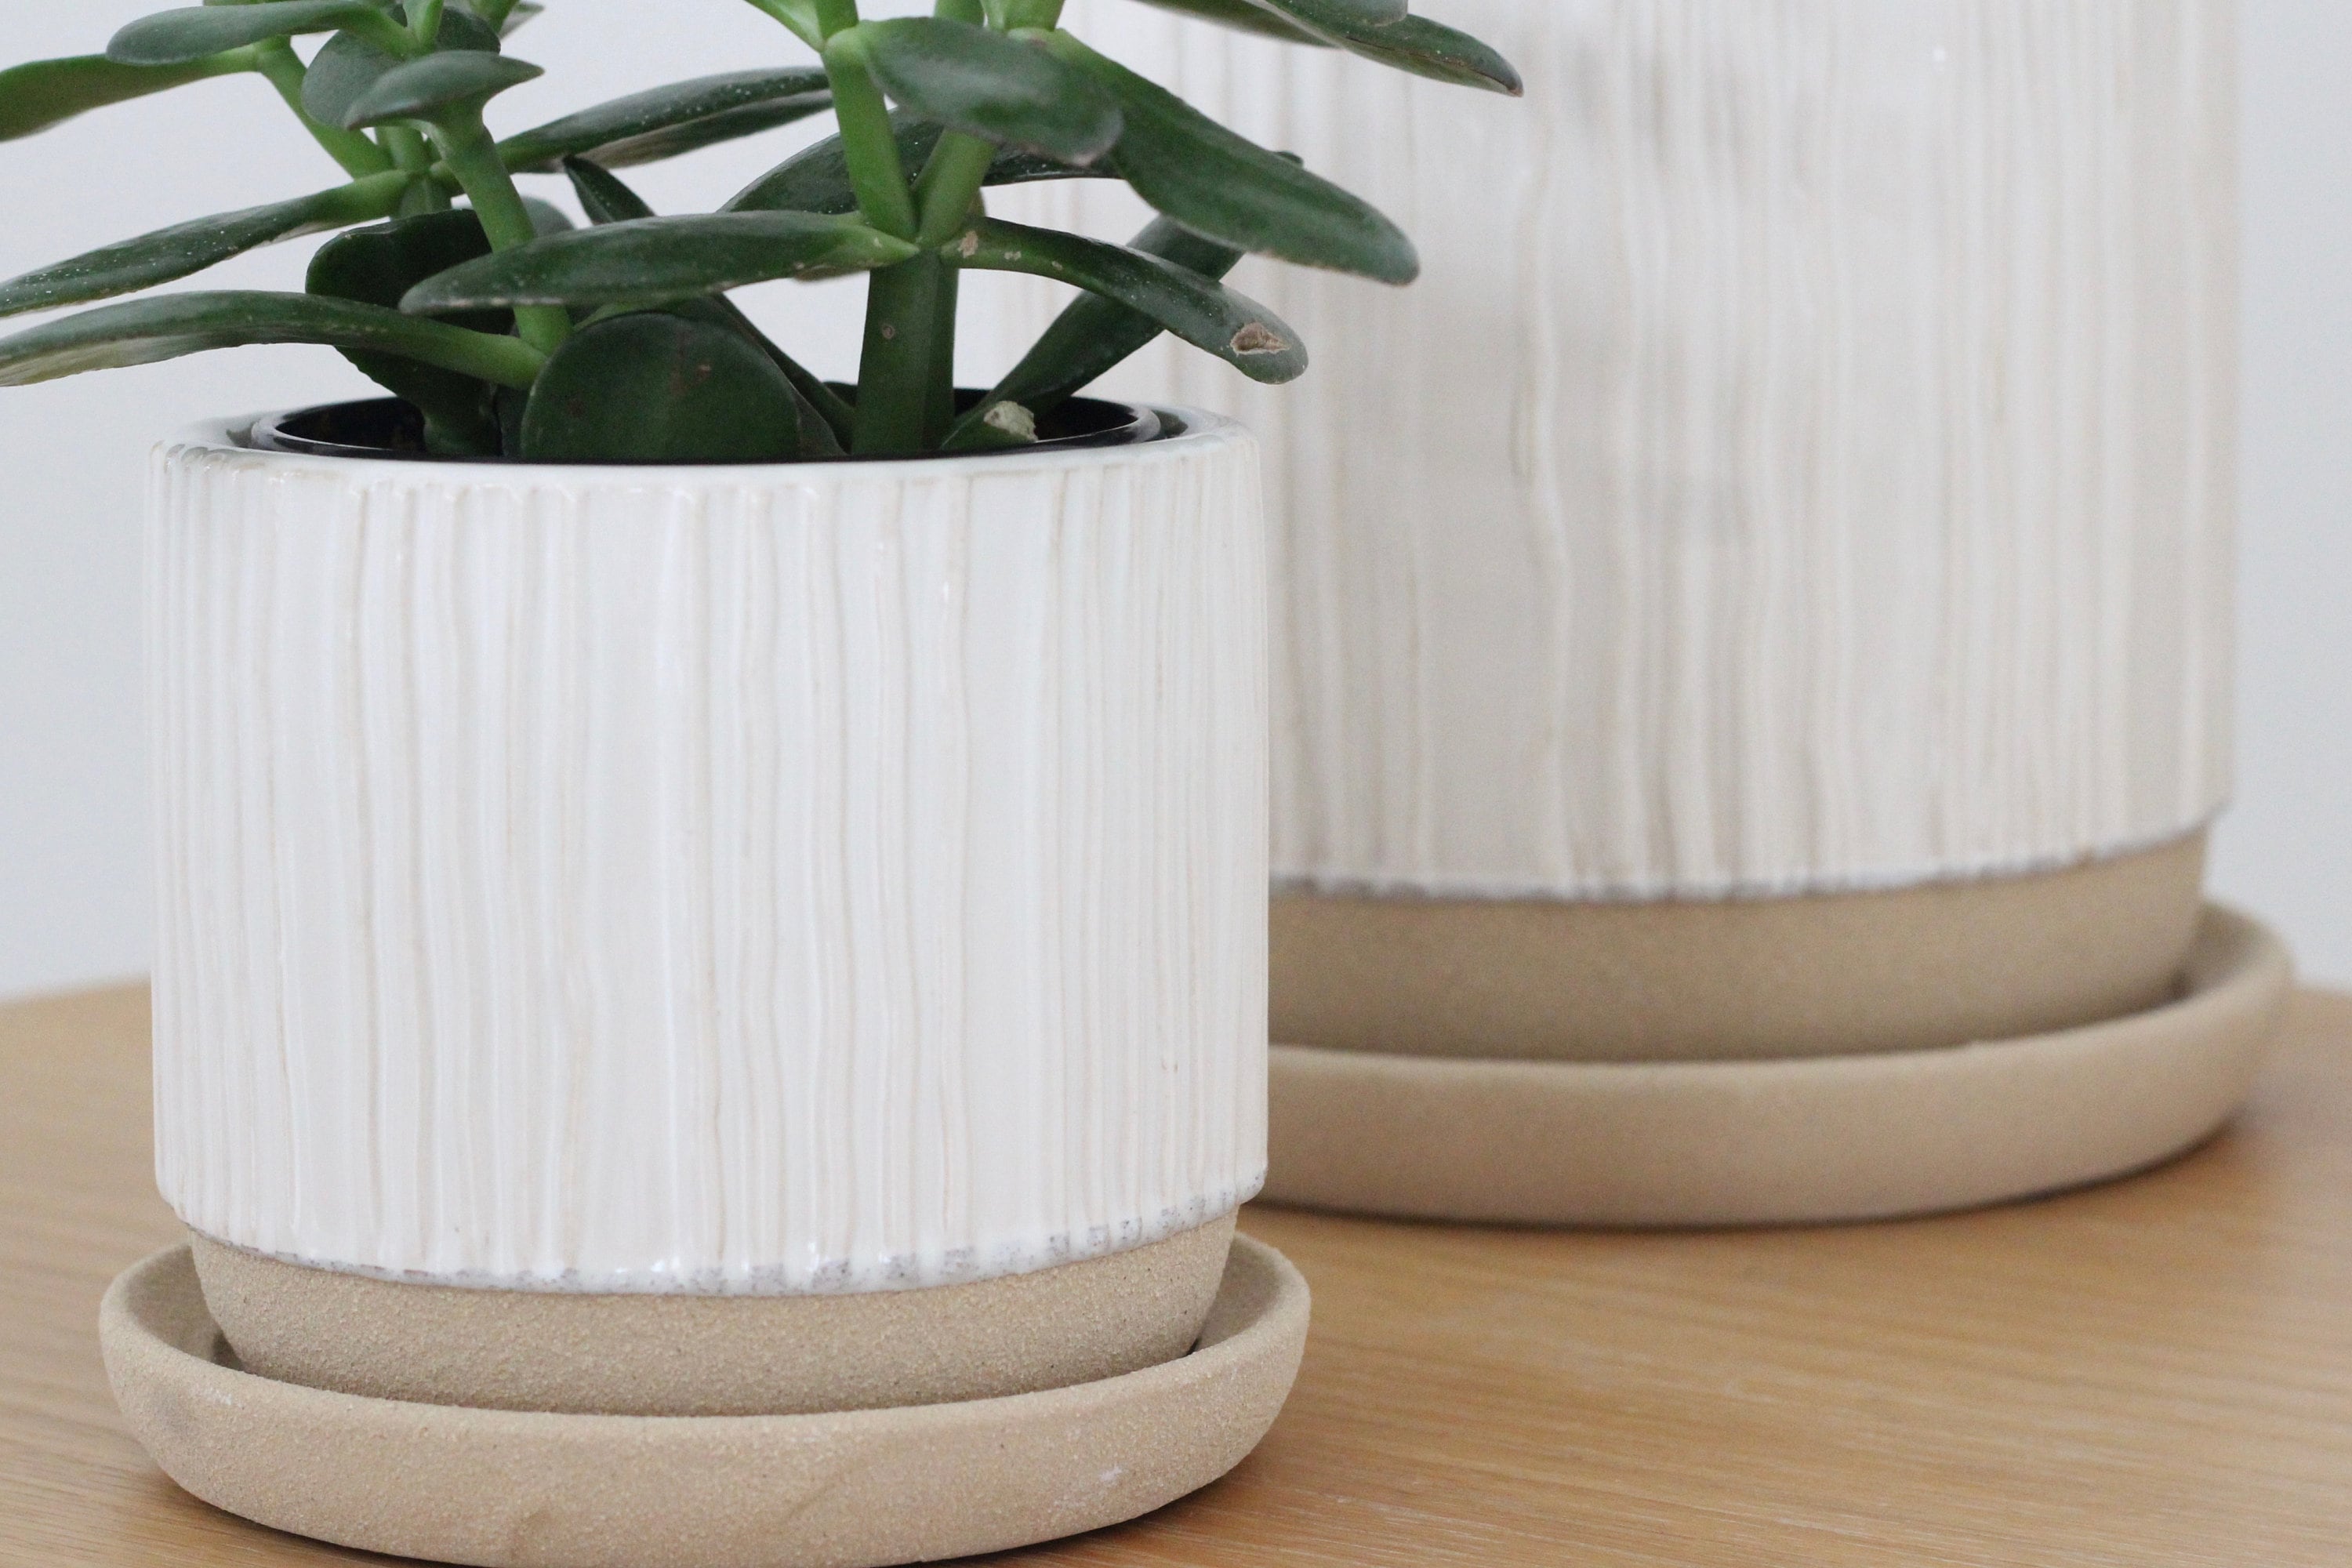 Textured Planter with Saucer in White Ceramic on Beige